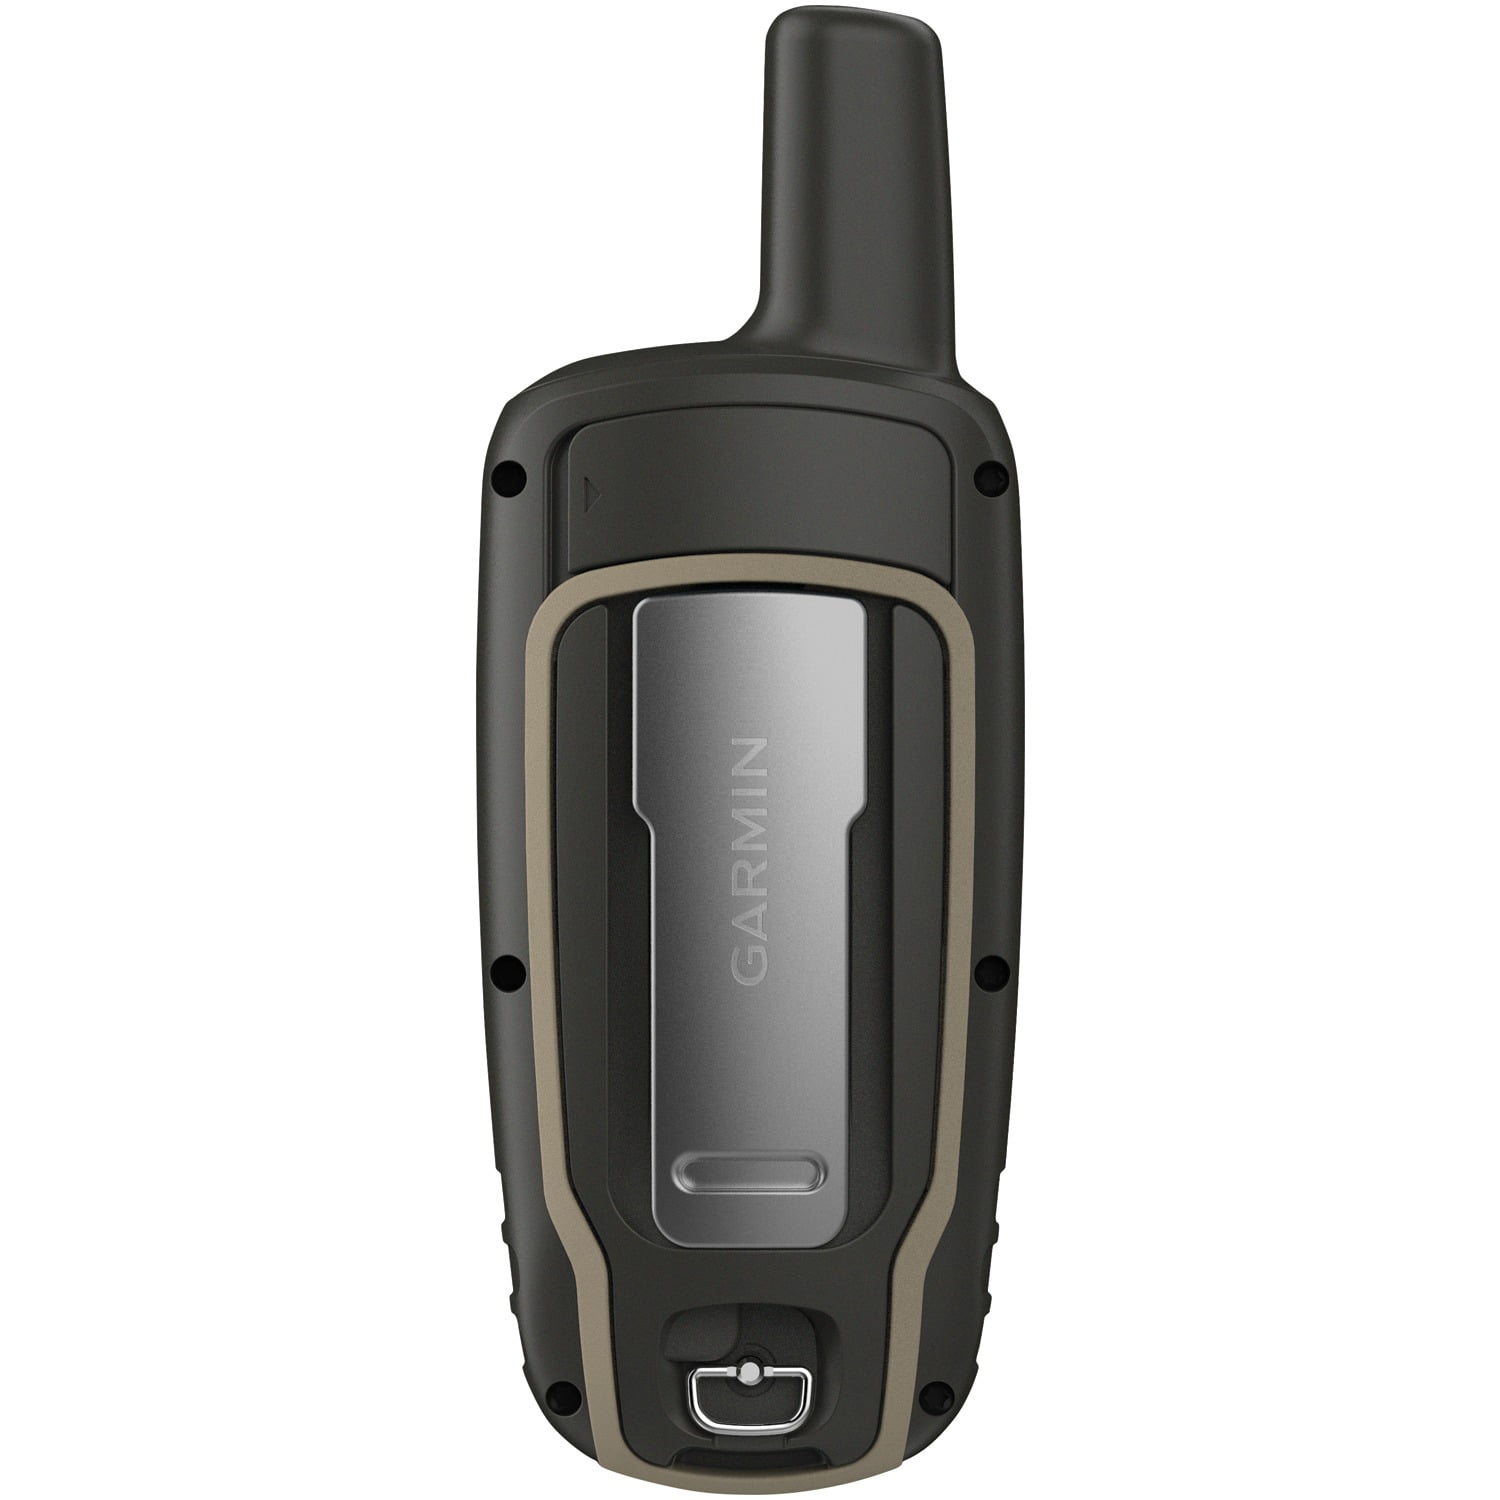 Garmin 010-02258-10 GPSMAP 64sx, Handheld GPS with Altimeter and Compass,  Preloaded With TopoActive Maps, Black/Tan